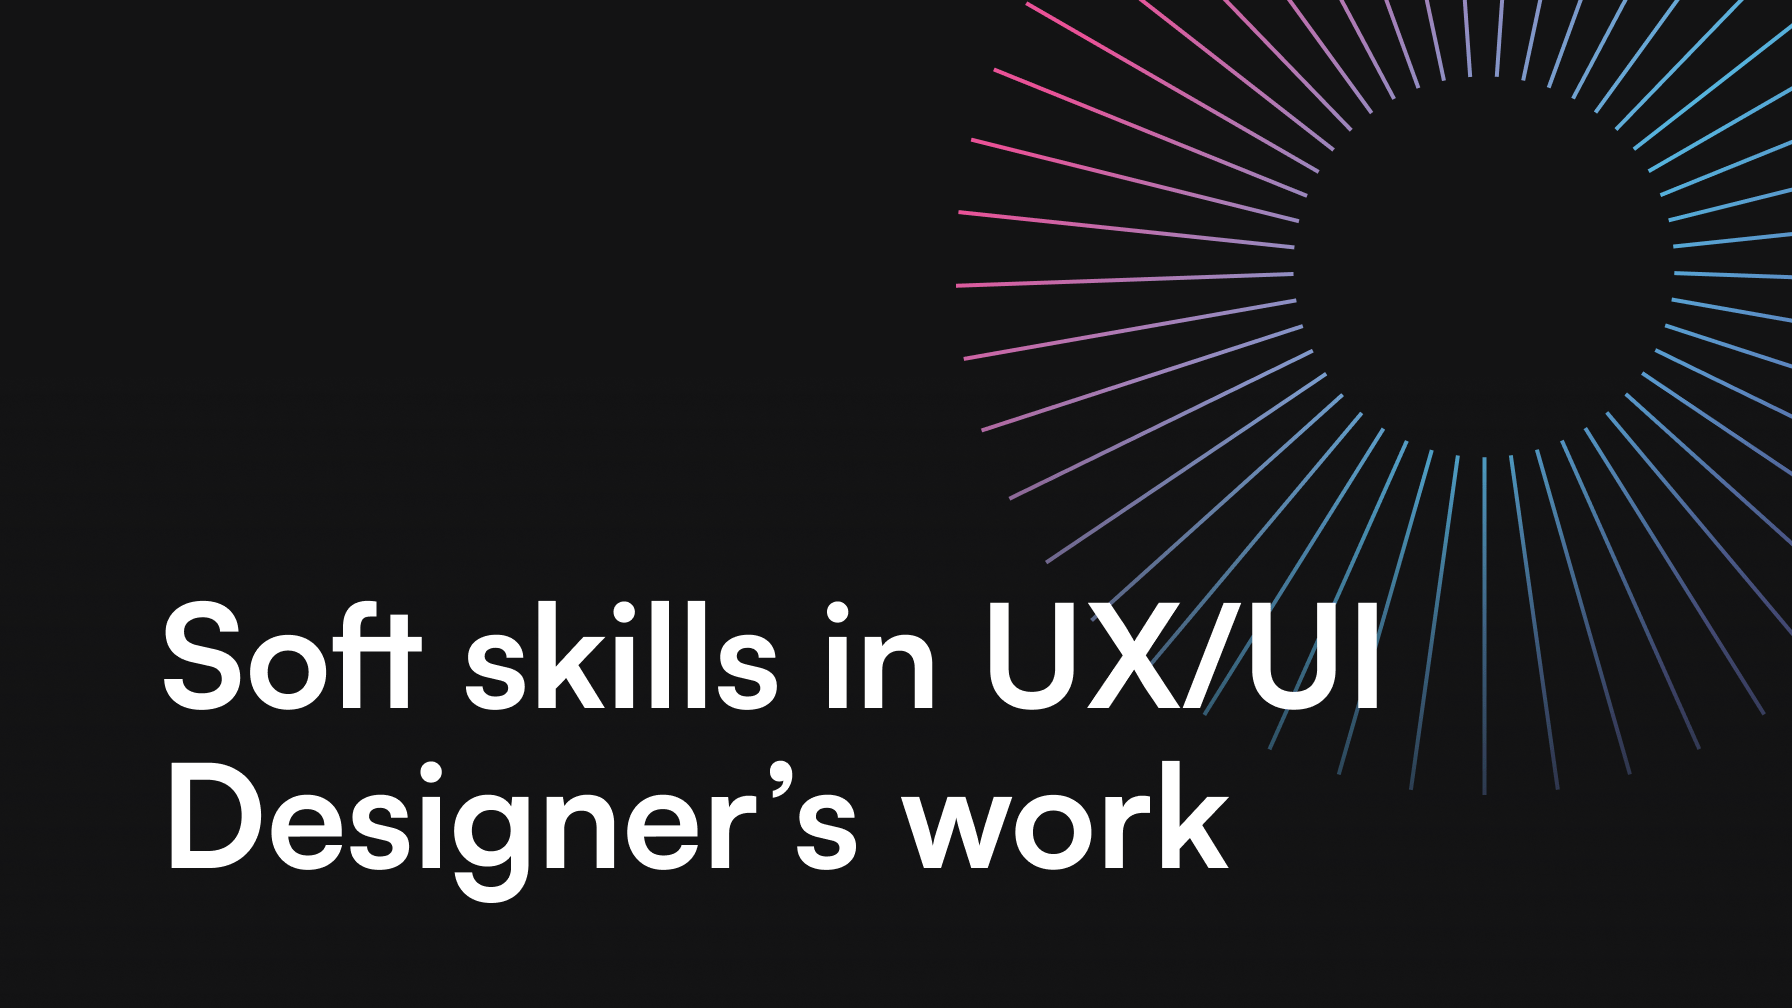 Soft skills in UX/UI Designer’s work – why they matter?